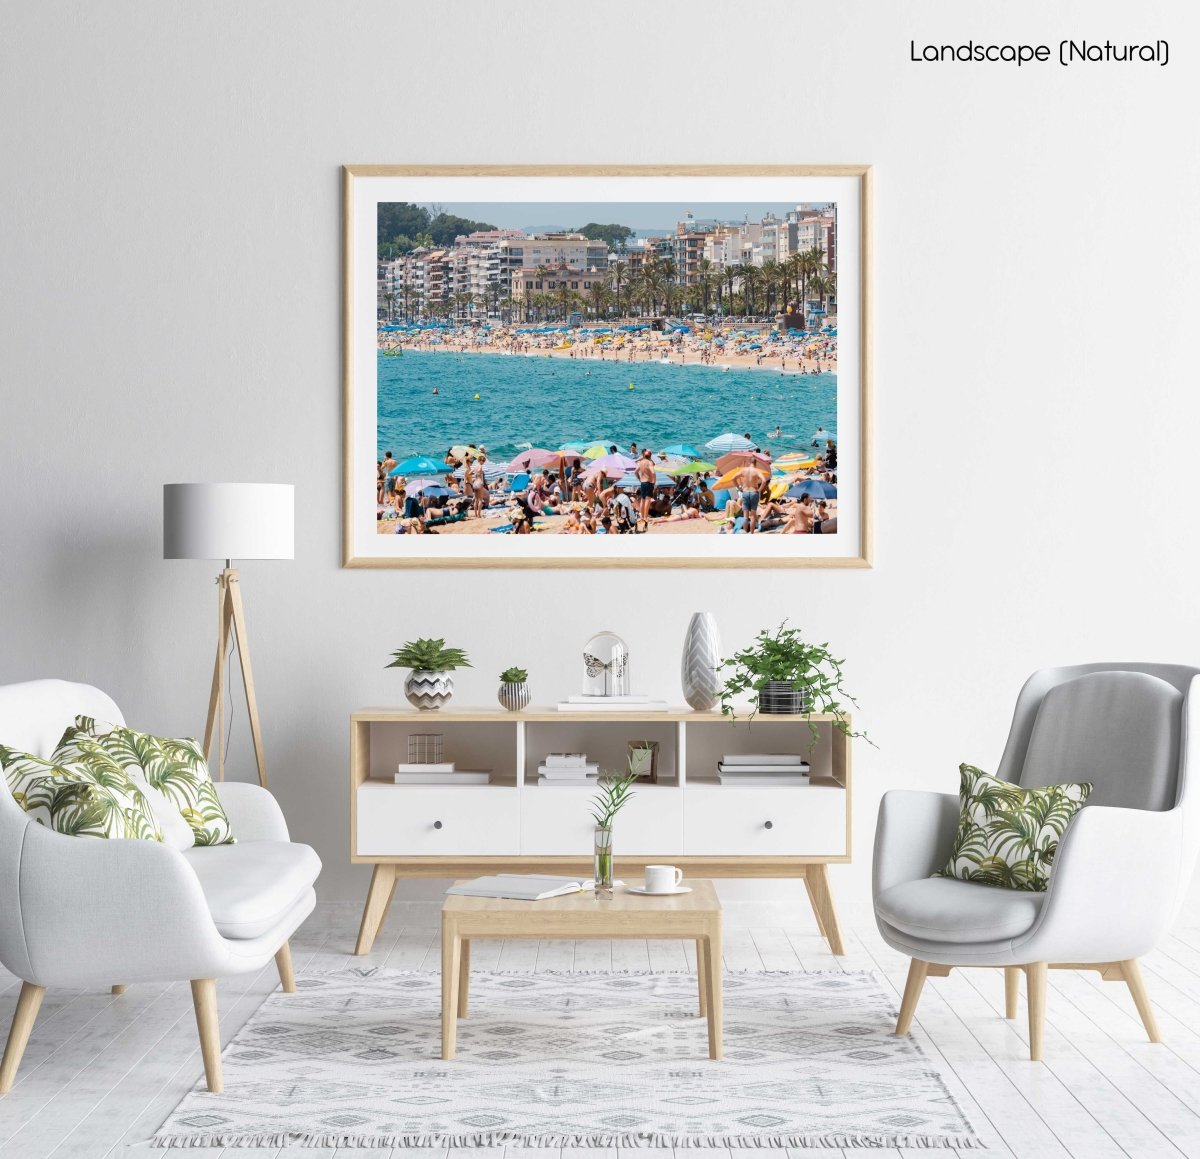 Crowds of people on either side of beaches at Lloret de Mar in a natural fine art frame